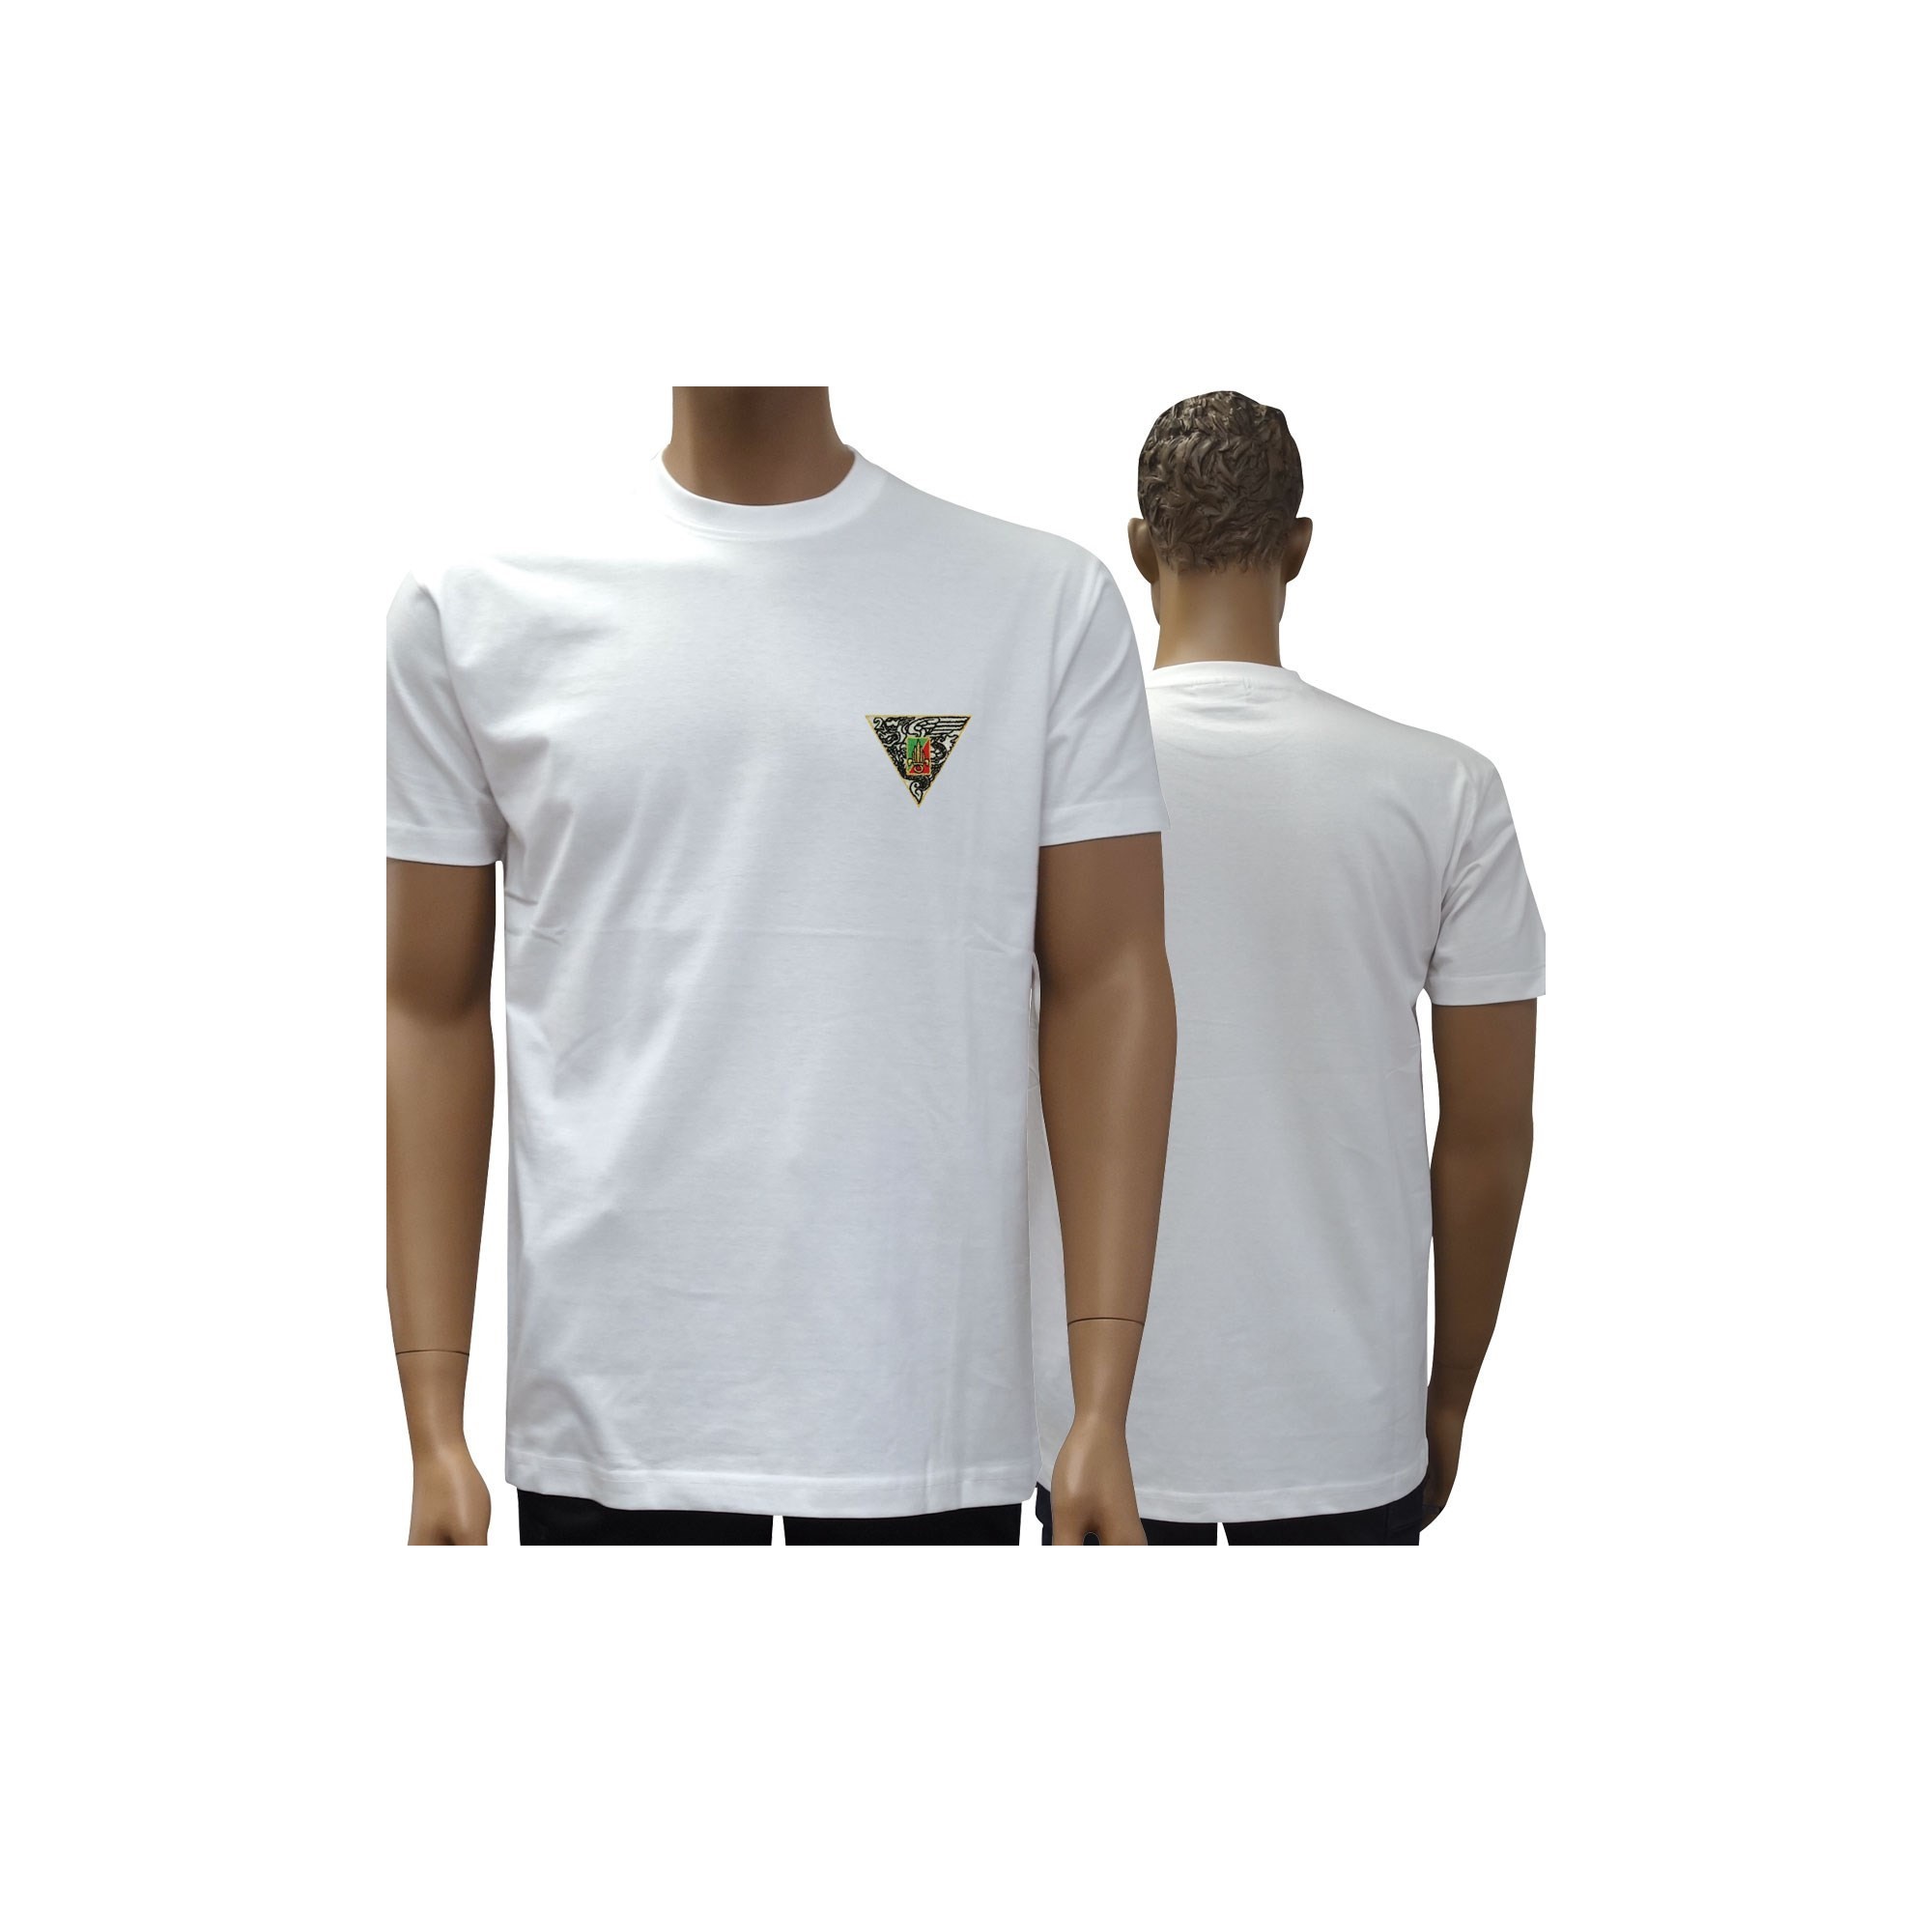 TEE SHIRT MANCHES COURTES BLANC BRODE 2 REP